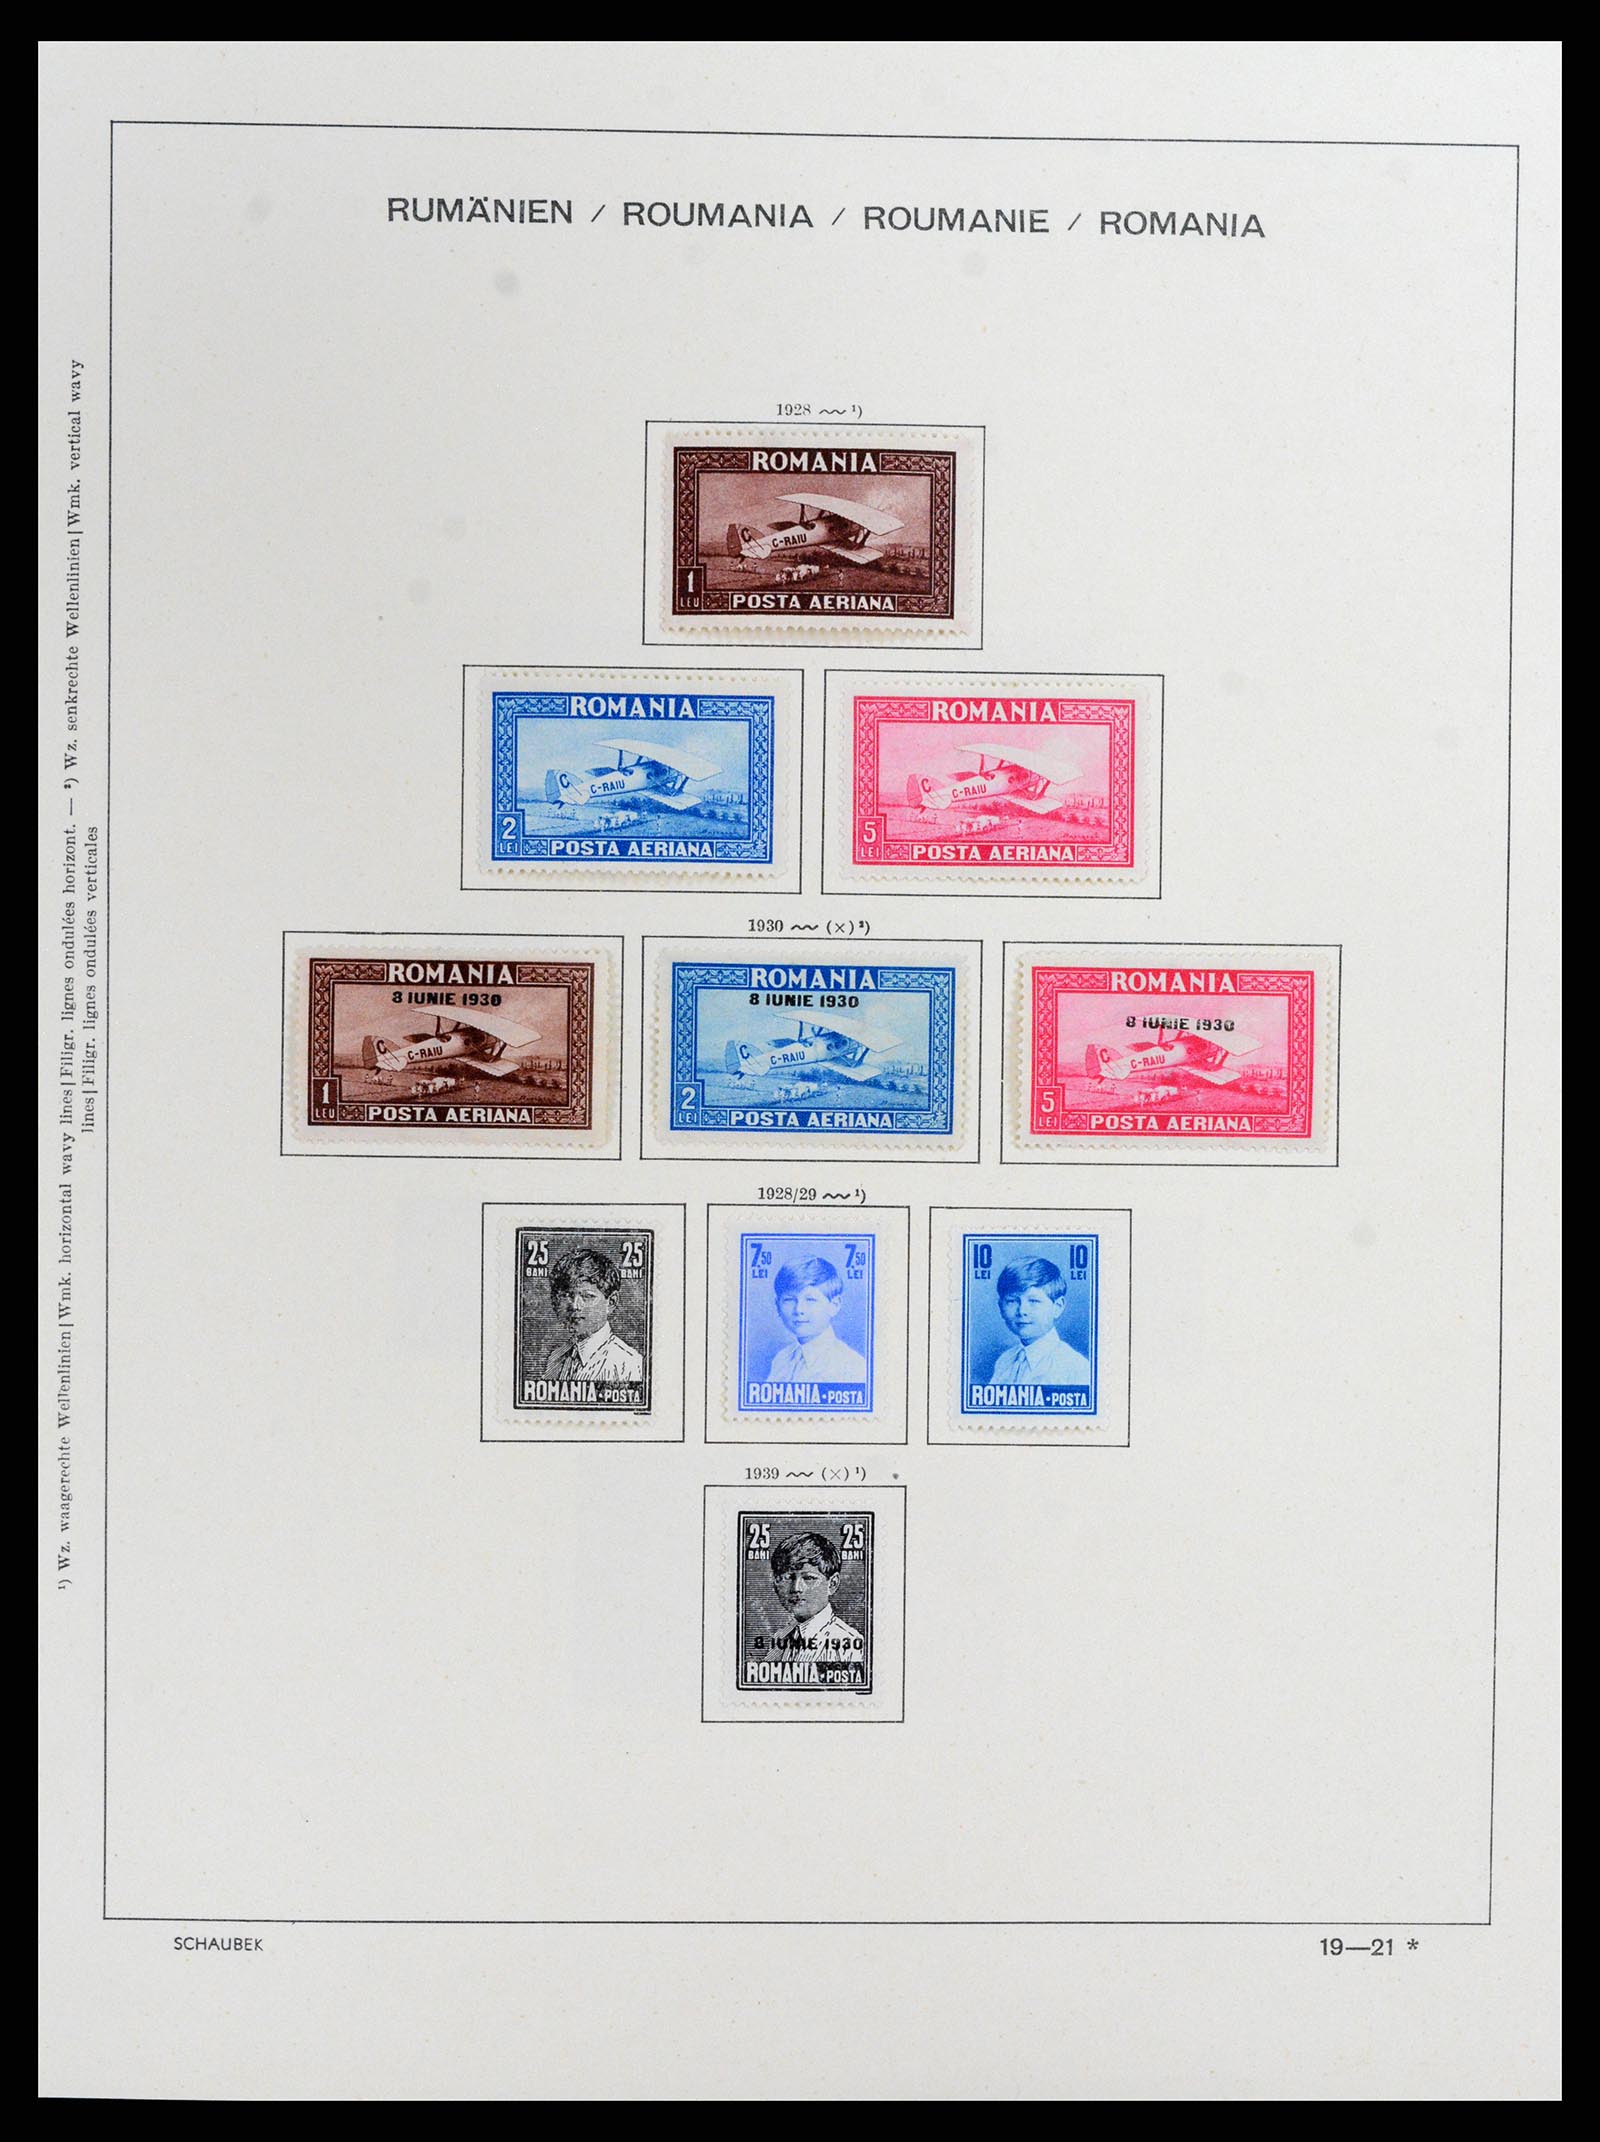 37596 024 - Stamp collection 37596 Romania 1862-2010.